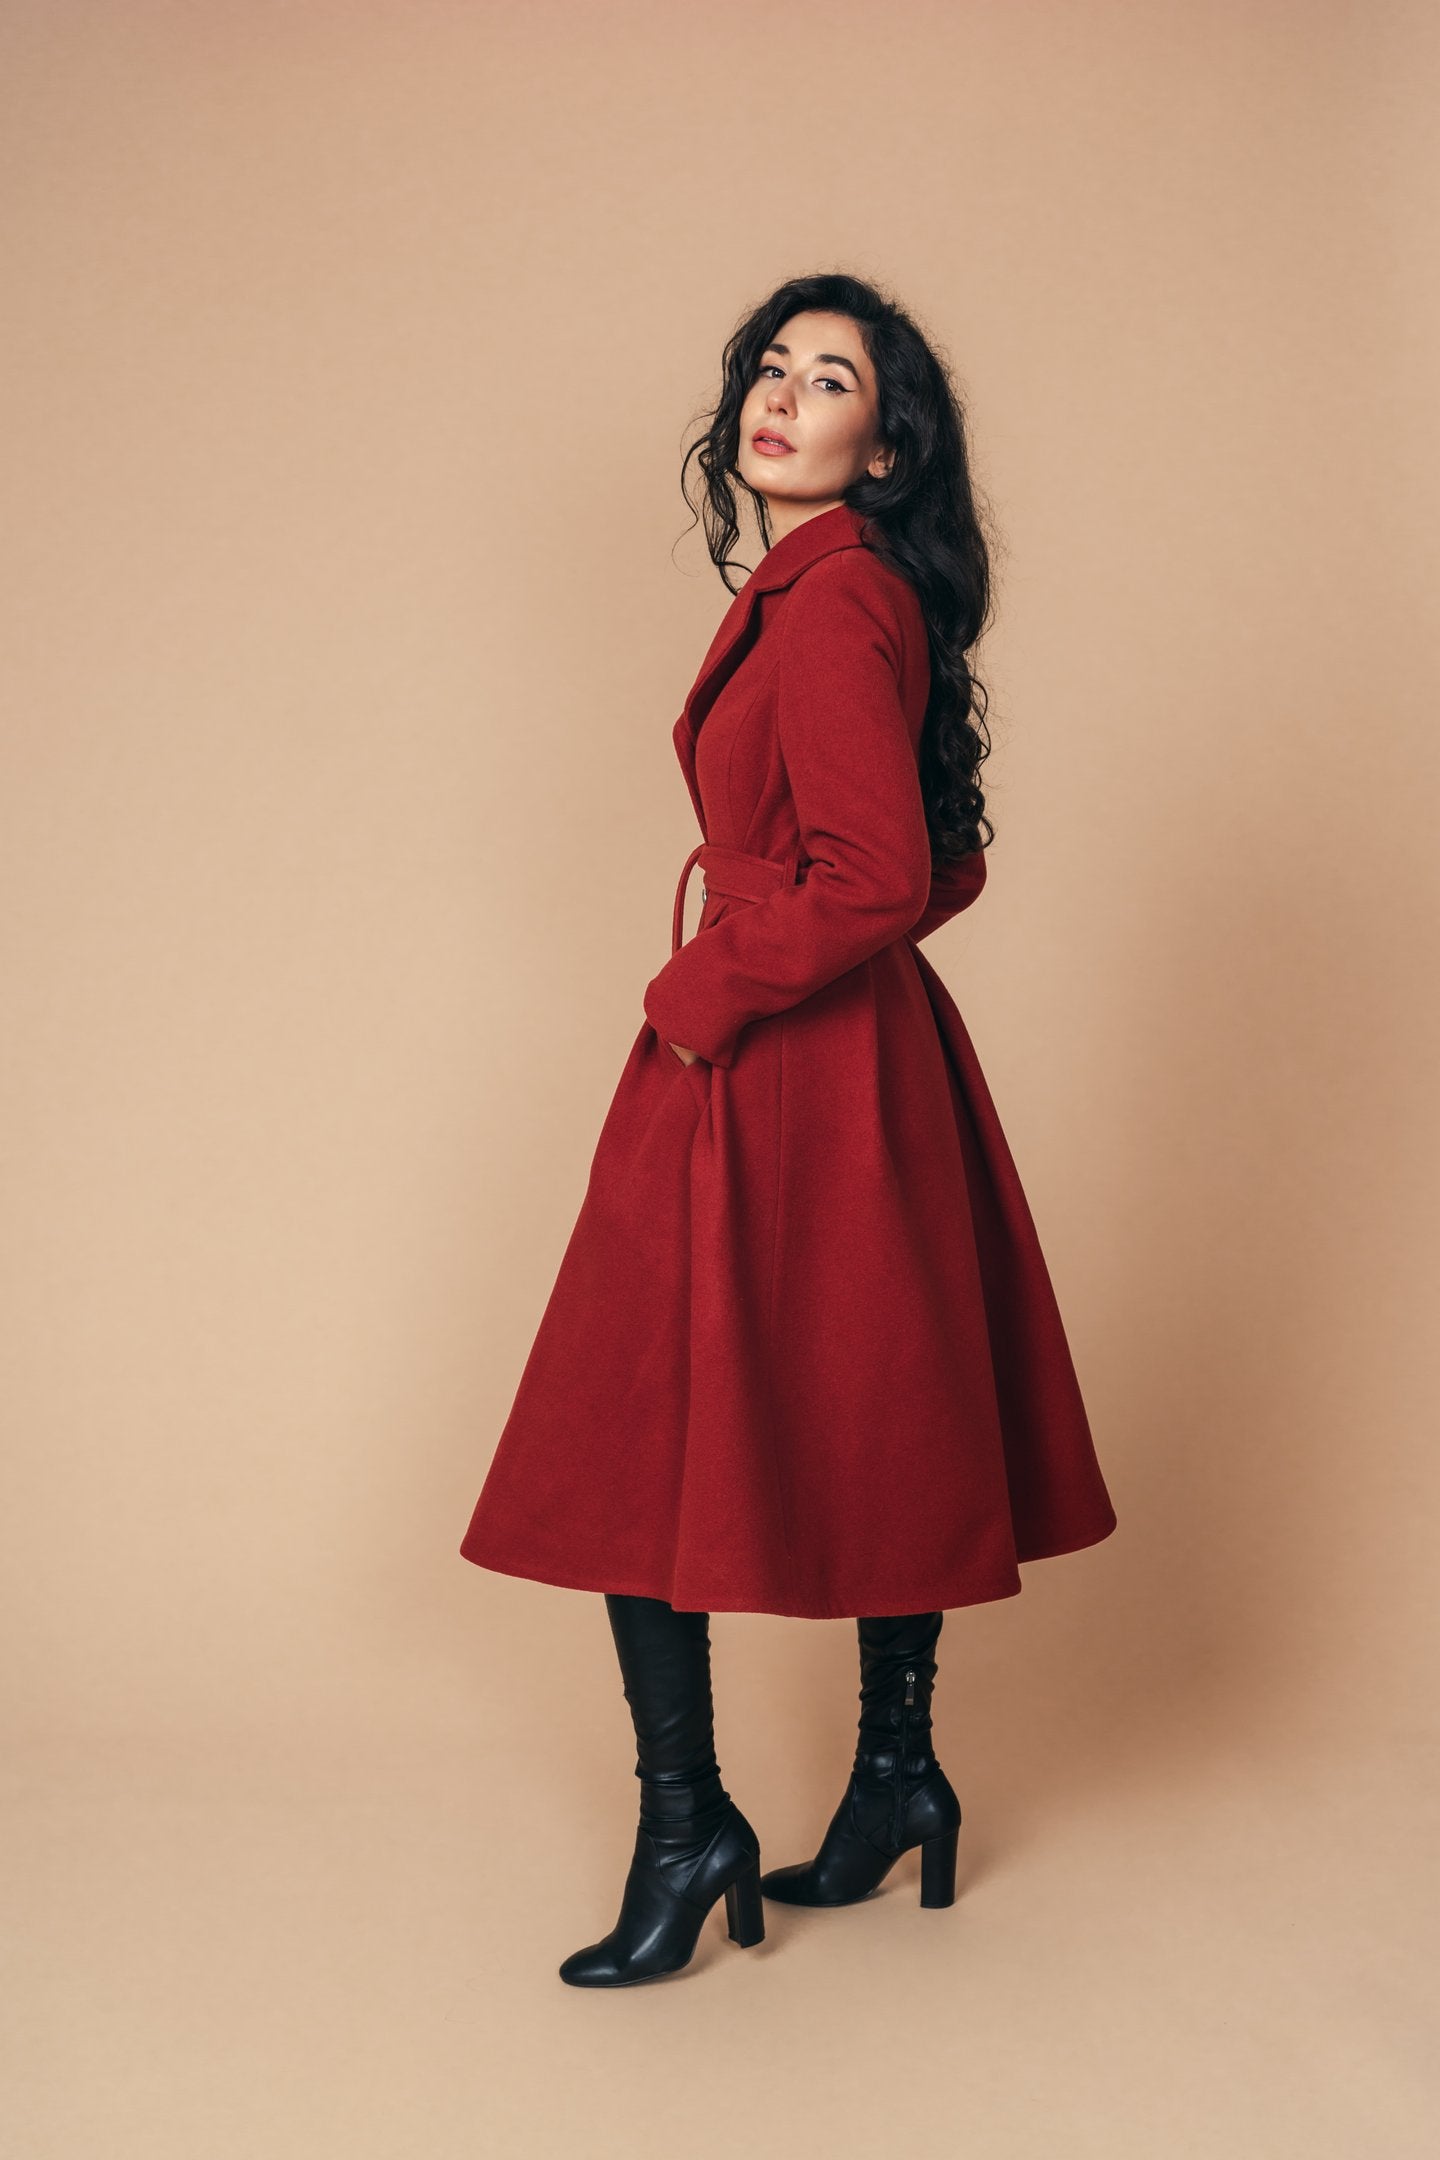 "Sloane" Coat 100% Wool With Lining in Red Brick Colour - front left shoulder side view